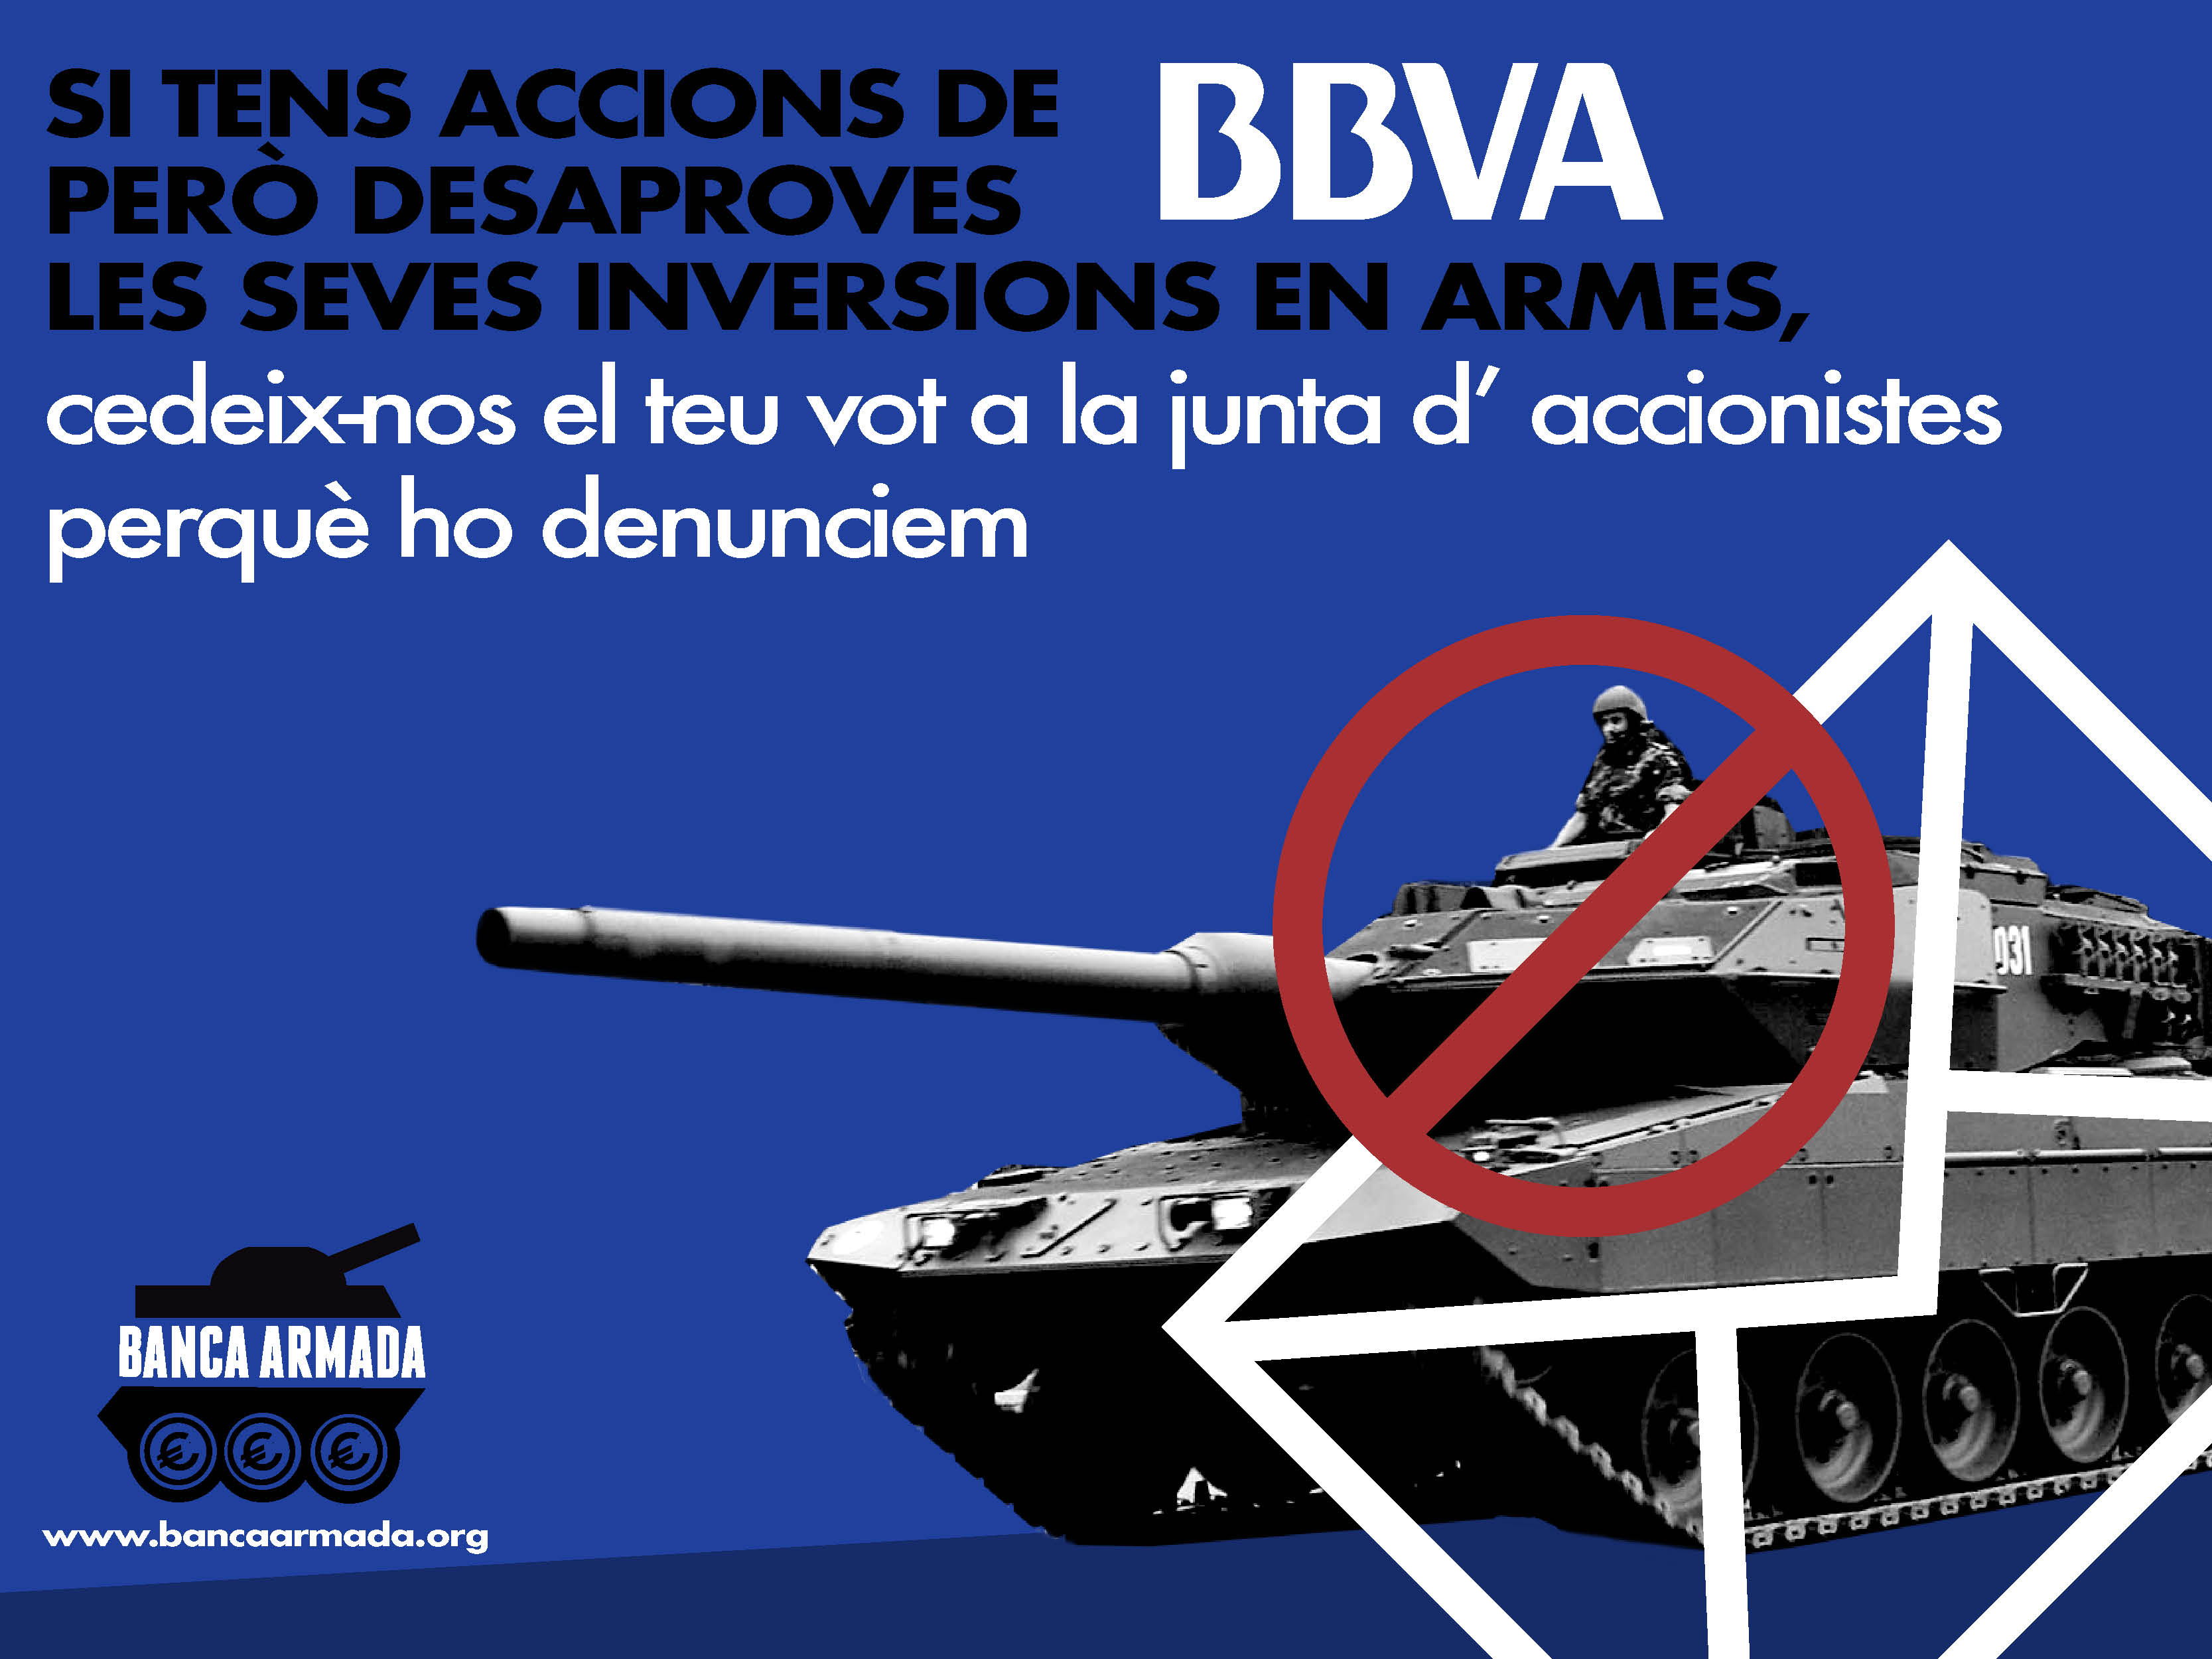 Petition for action to denounce investments in weapons at the 2018 share holders meeting of BBVA